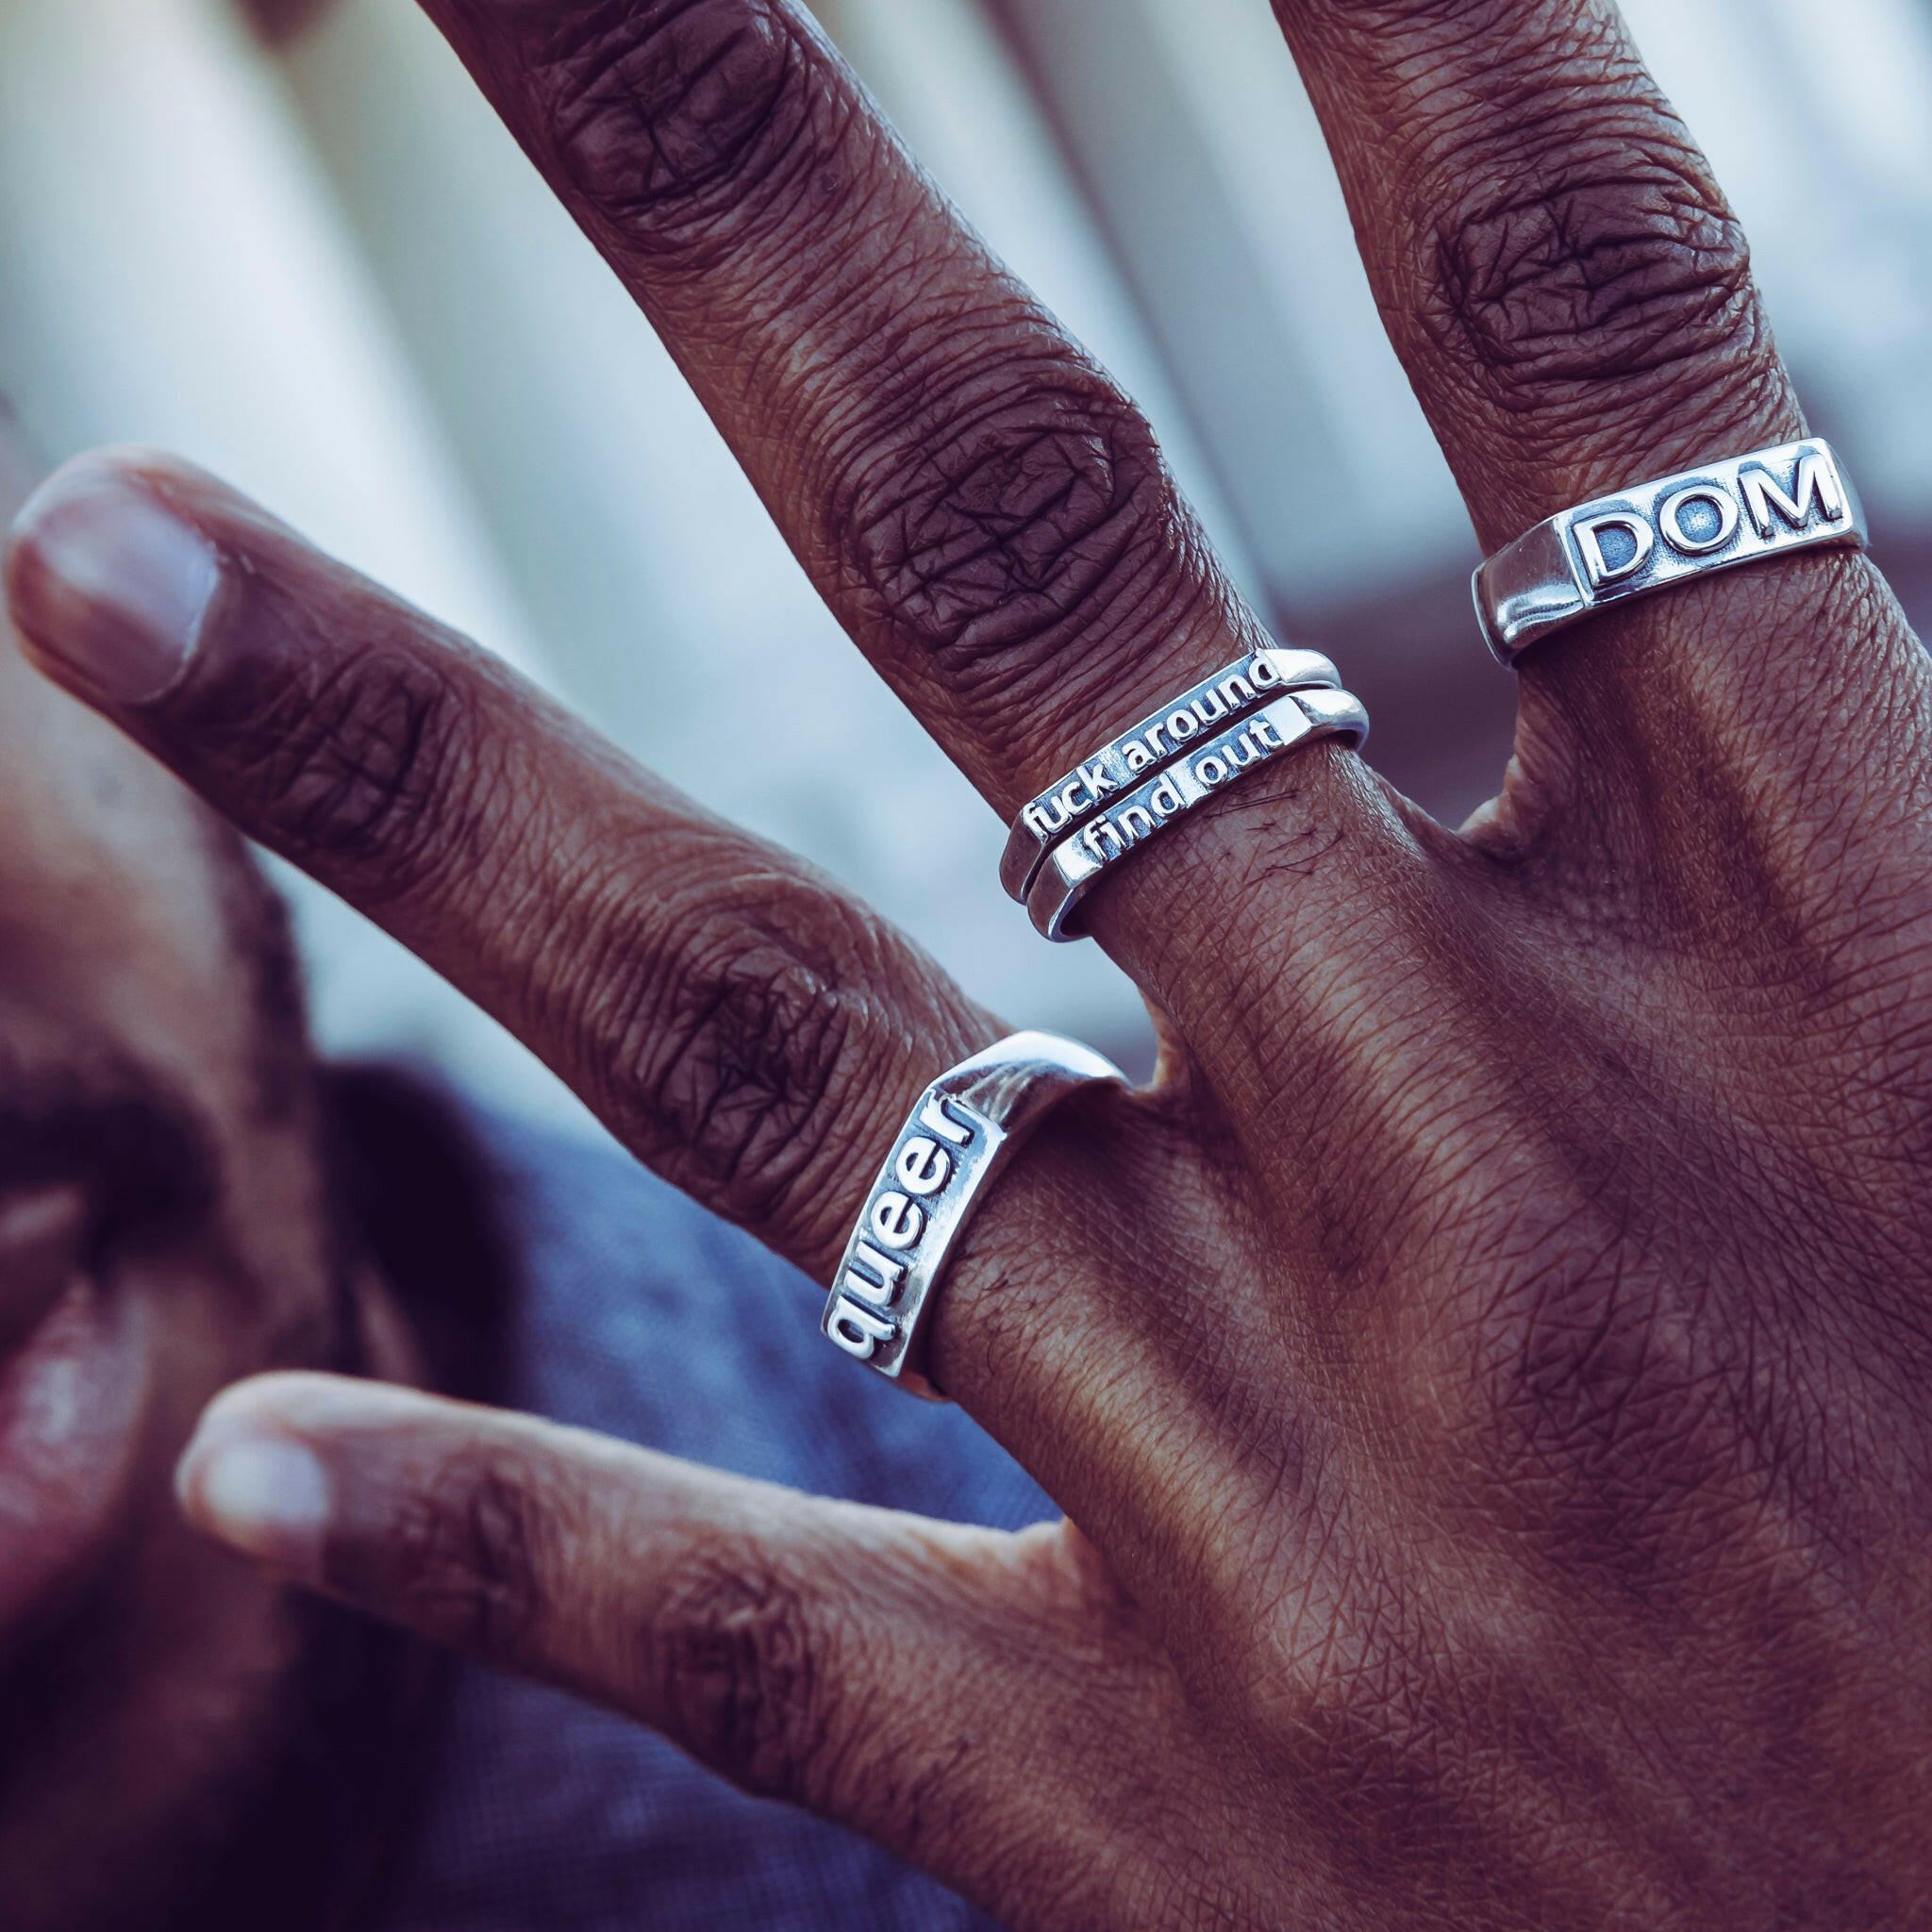 picture of the back of somebody's hand wearing four Sterling Silver rings. Far left (ring finger)-a Sterling silver ring that has text that reads "queer".  Middle (middle finger)-Two Sterling Silver rings stacked atop one another one with text that reads "fuck around" and the other reading text that says 'find out". Far Right (index finger)- a Sterling Silver ring that has text that reads "DOM"